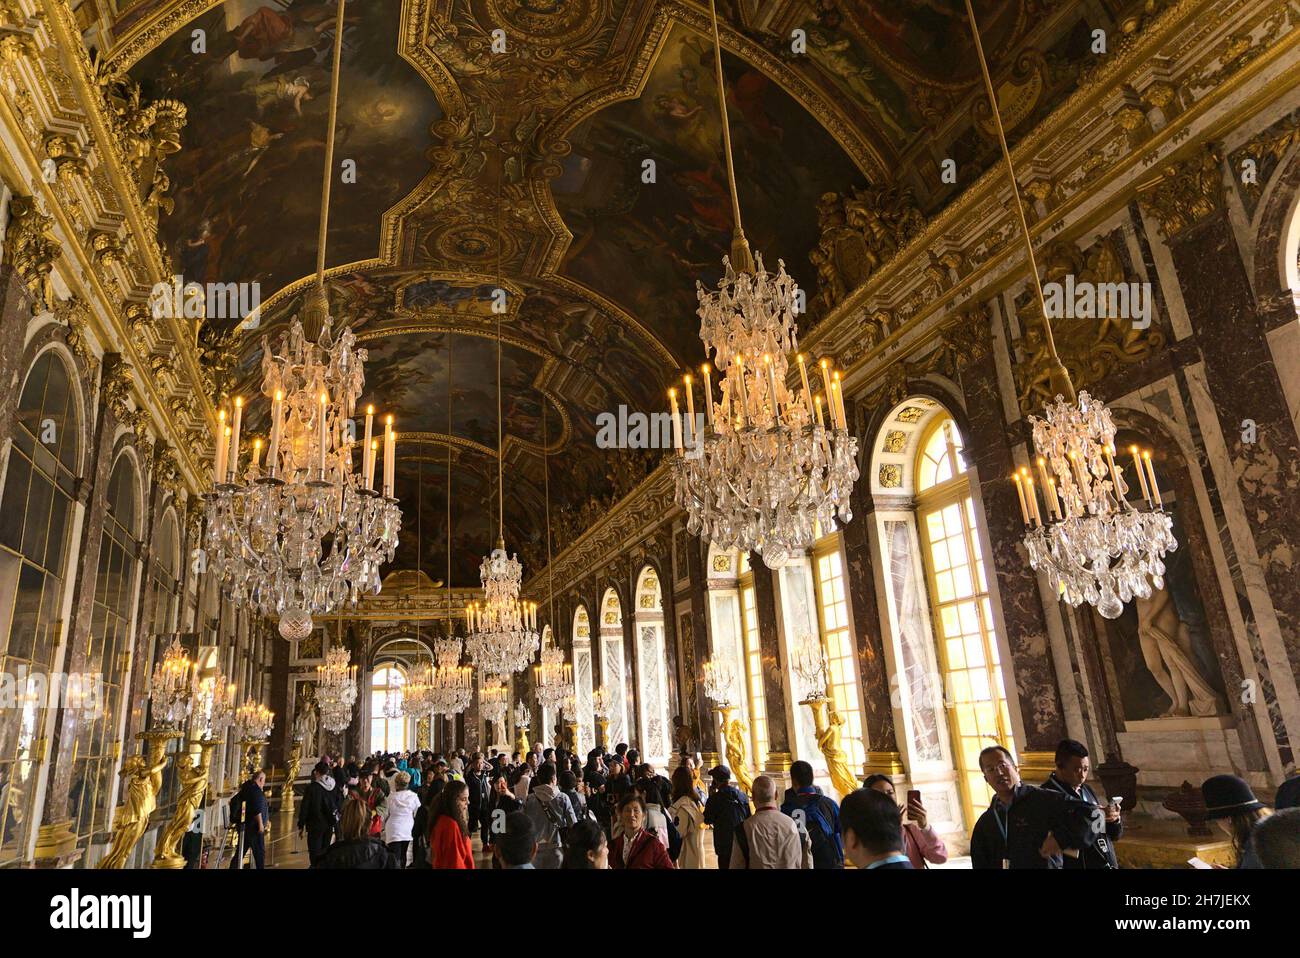 PARIS, FRANCE - Oct 01, 2019: A low angle shot of chandeliers on the ceilings in Palace of Versailles, Paris, France Stock Photo